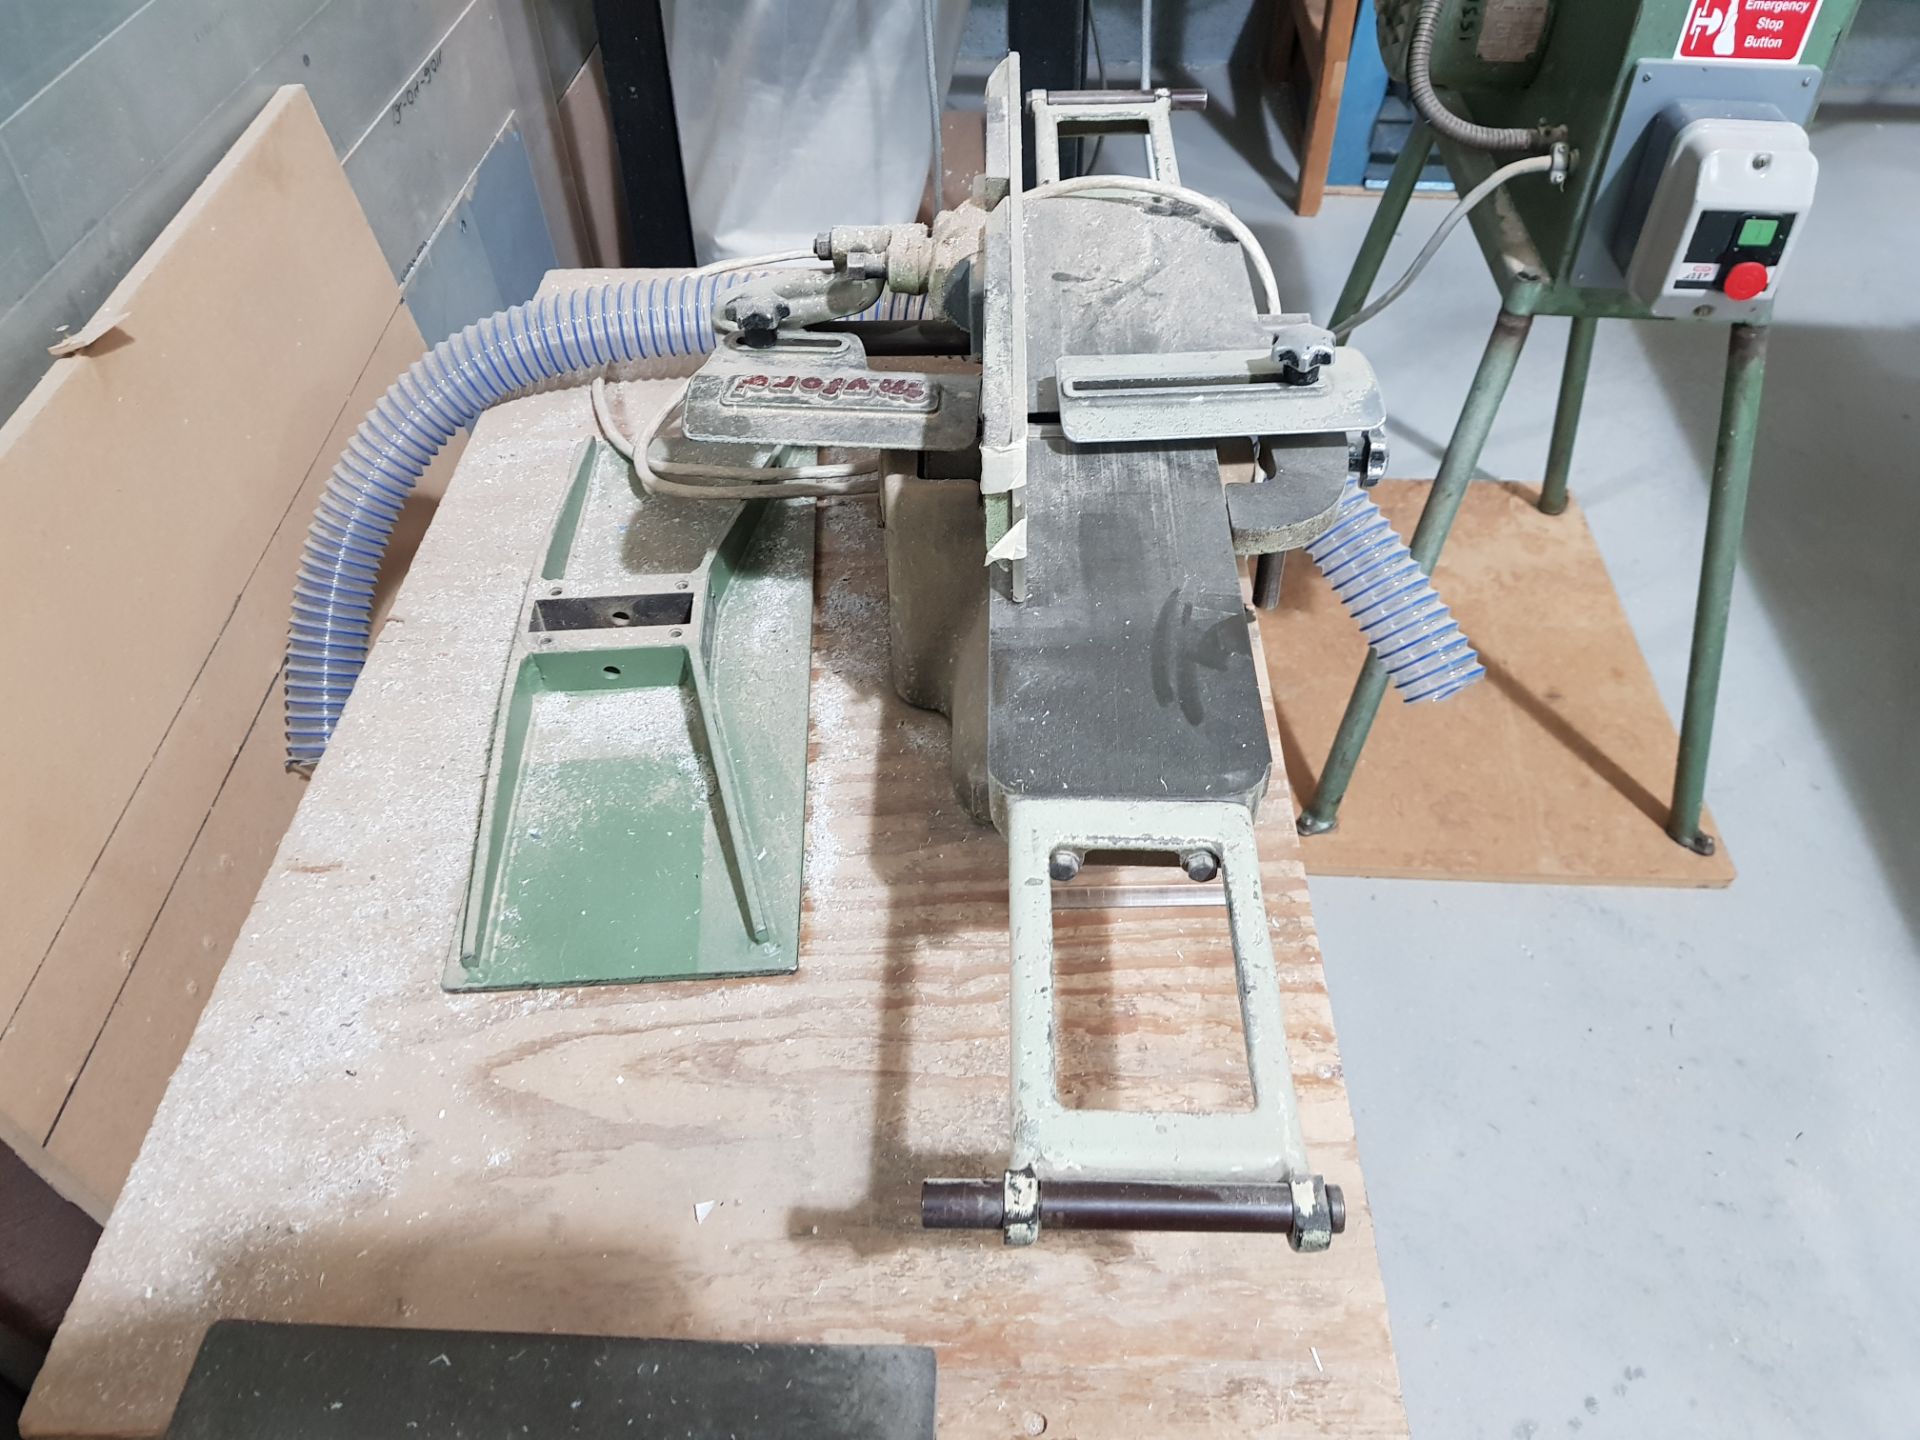 MYFORD ADJUSTABLE ENGINEERING PLANER AND STAND - Image 3 of 4